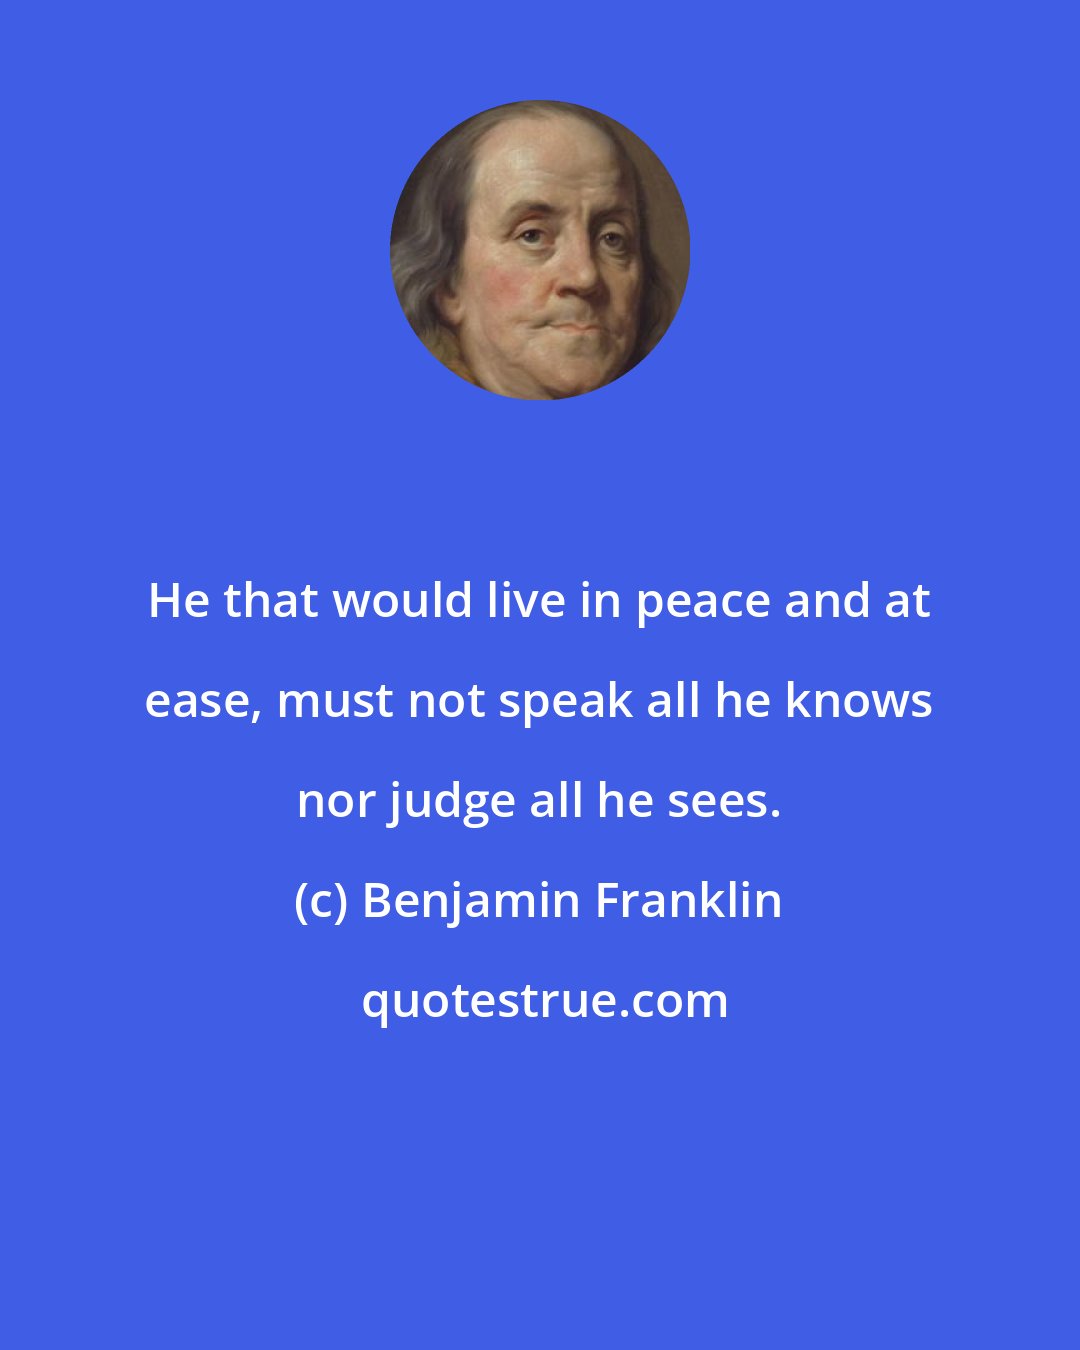 Benjamin Franklin: He that would live in peace and at ease, must not speak all he knows nor judge all he sees.